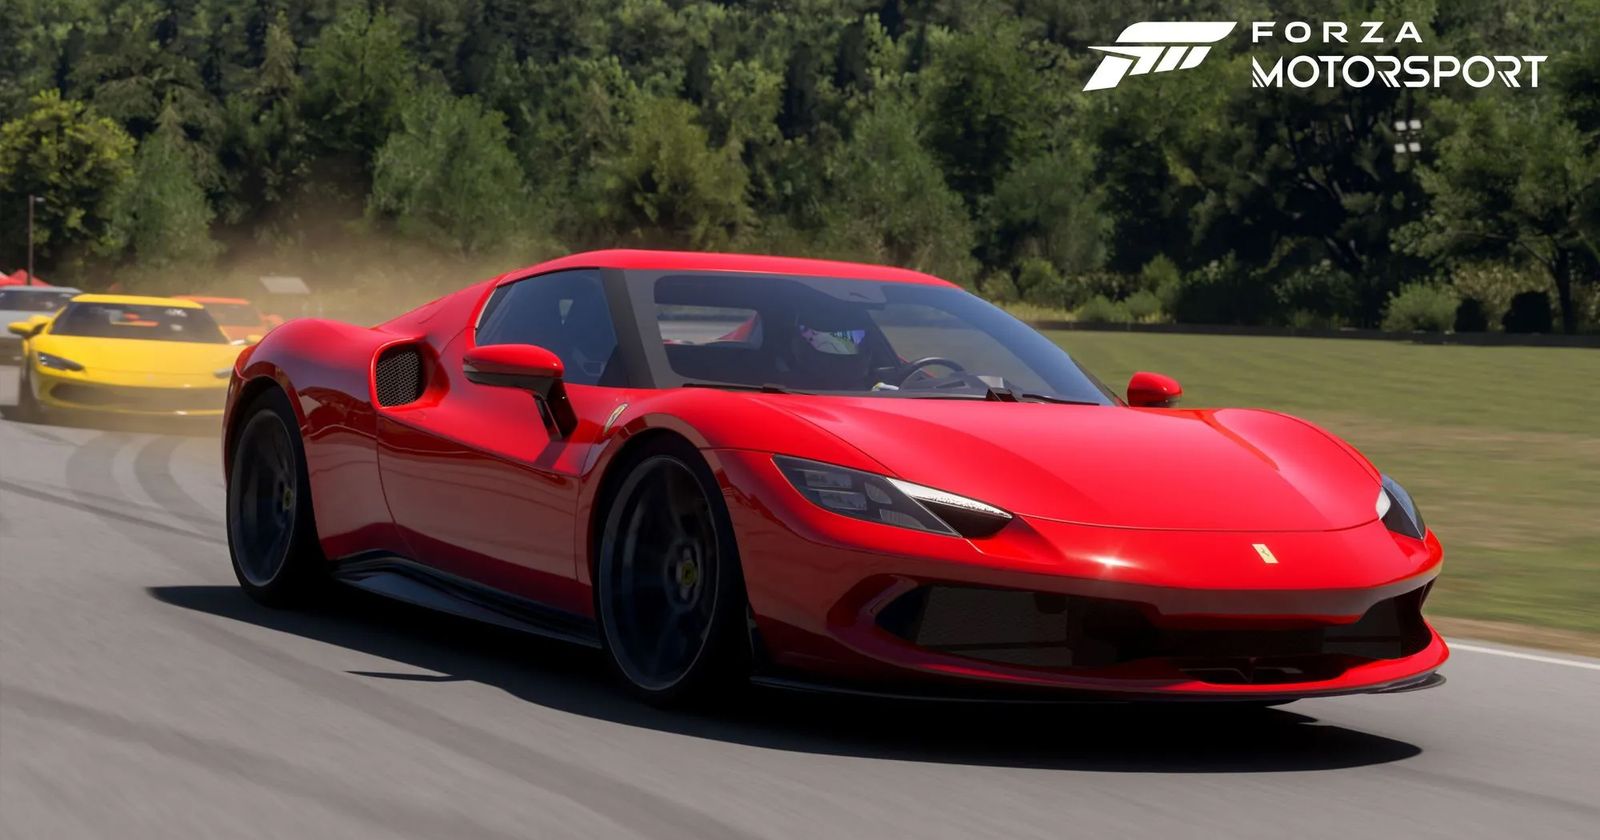 Forza Motorsport's Post-Launch Track Updates Will Start With Yas